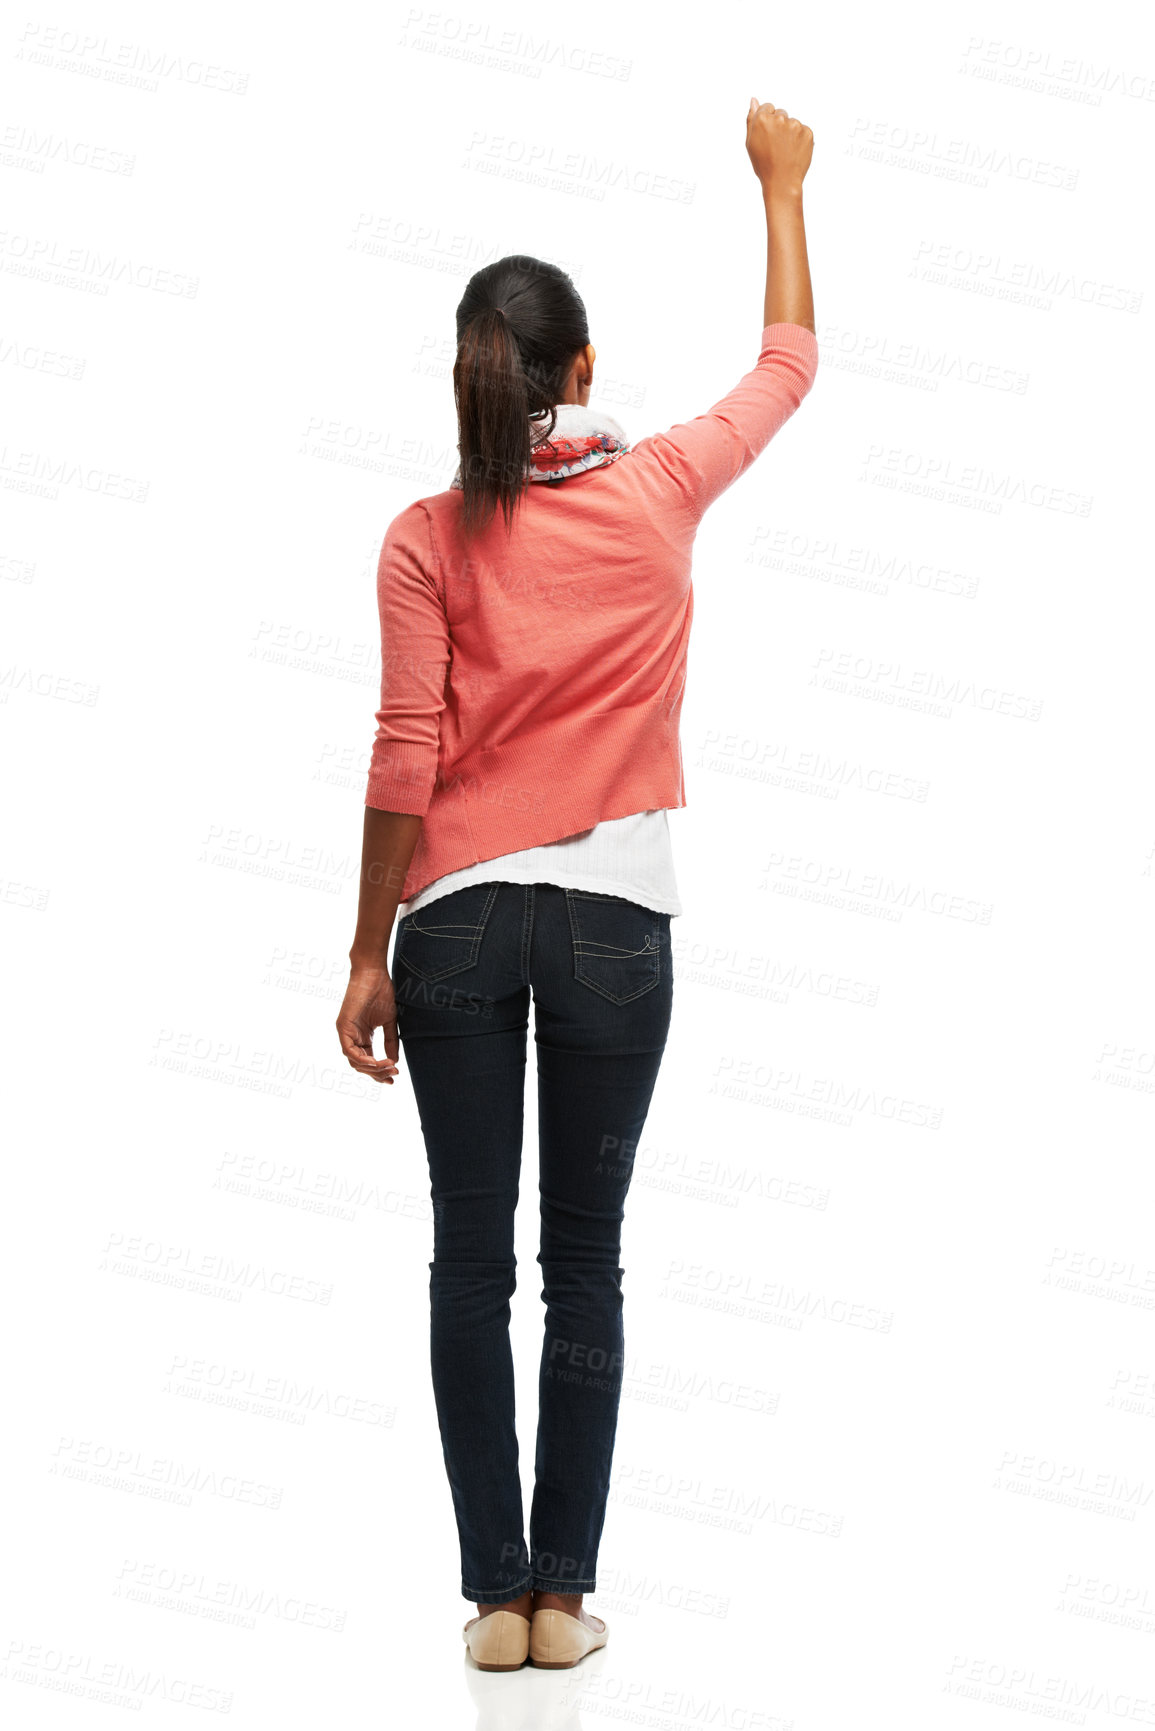 Buy stock photo Review of a young woman knocking against white copyspace 